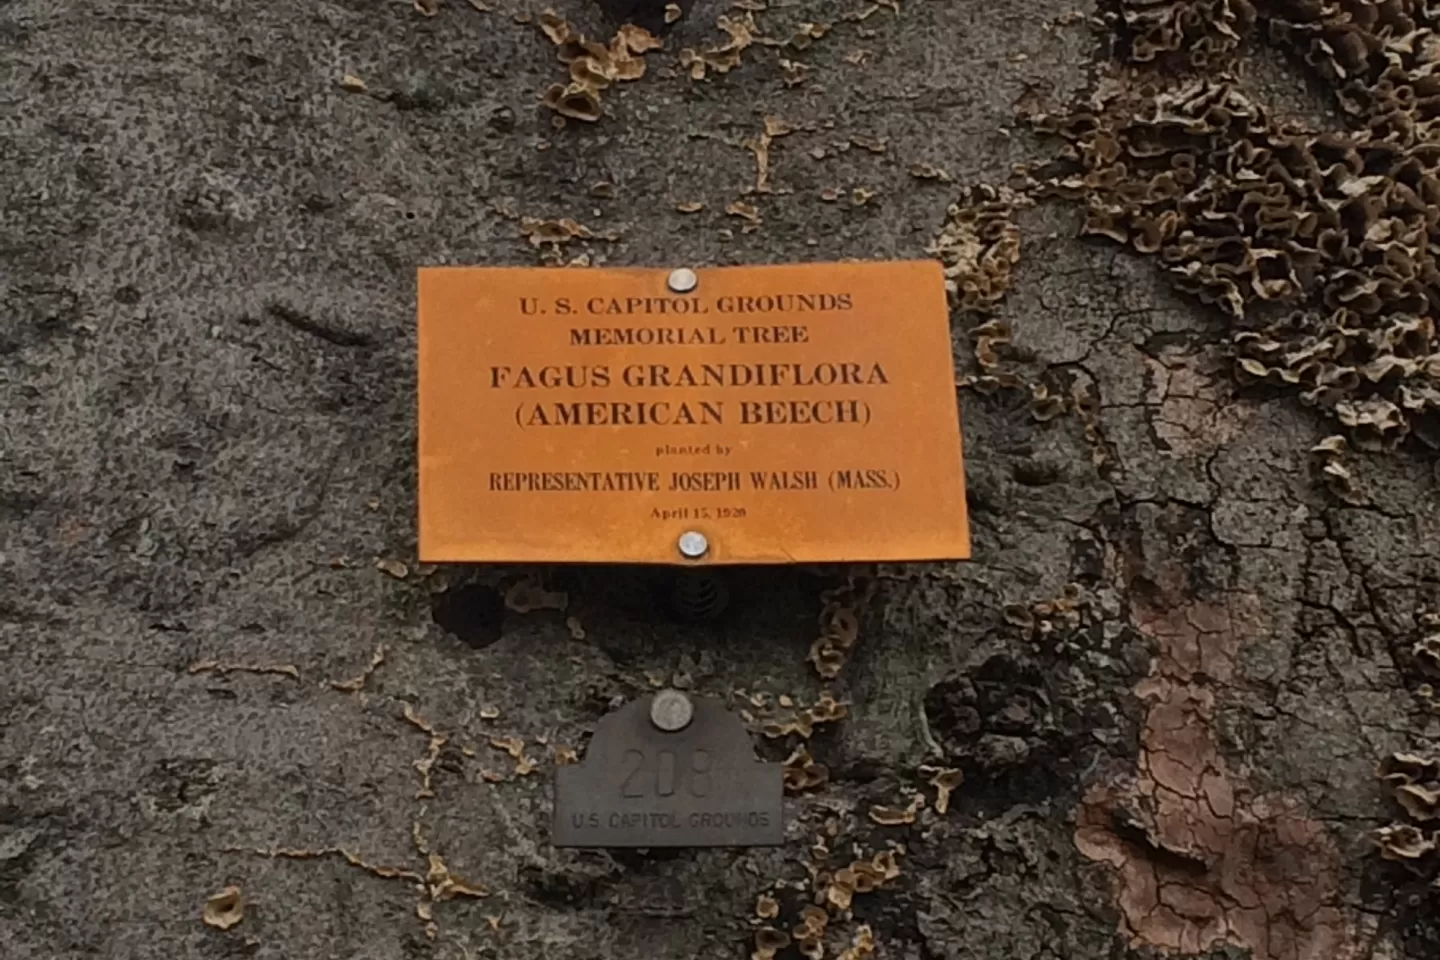 Plaque that reads: U.S. Capitol Grounds Memorial Tree  Fagus grandiflora (American Beech)  planted by  Representative Joseph Walsh (Mass.)  April 15, 1920